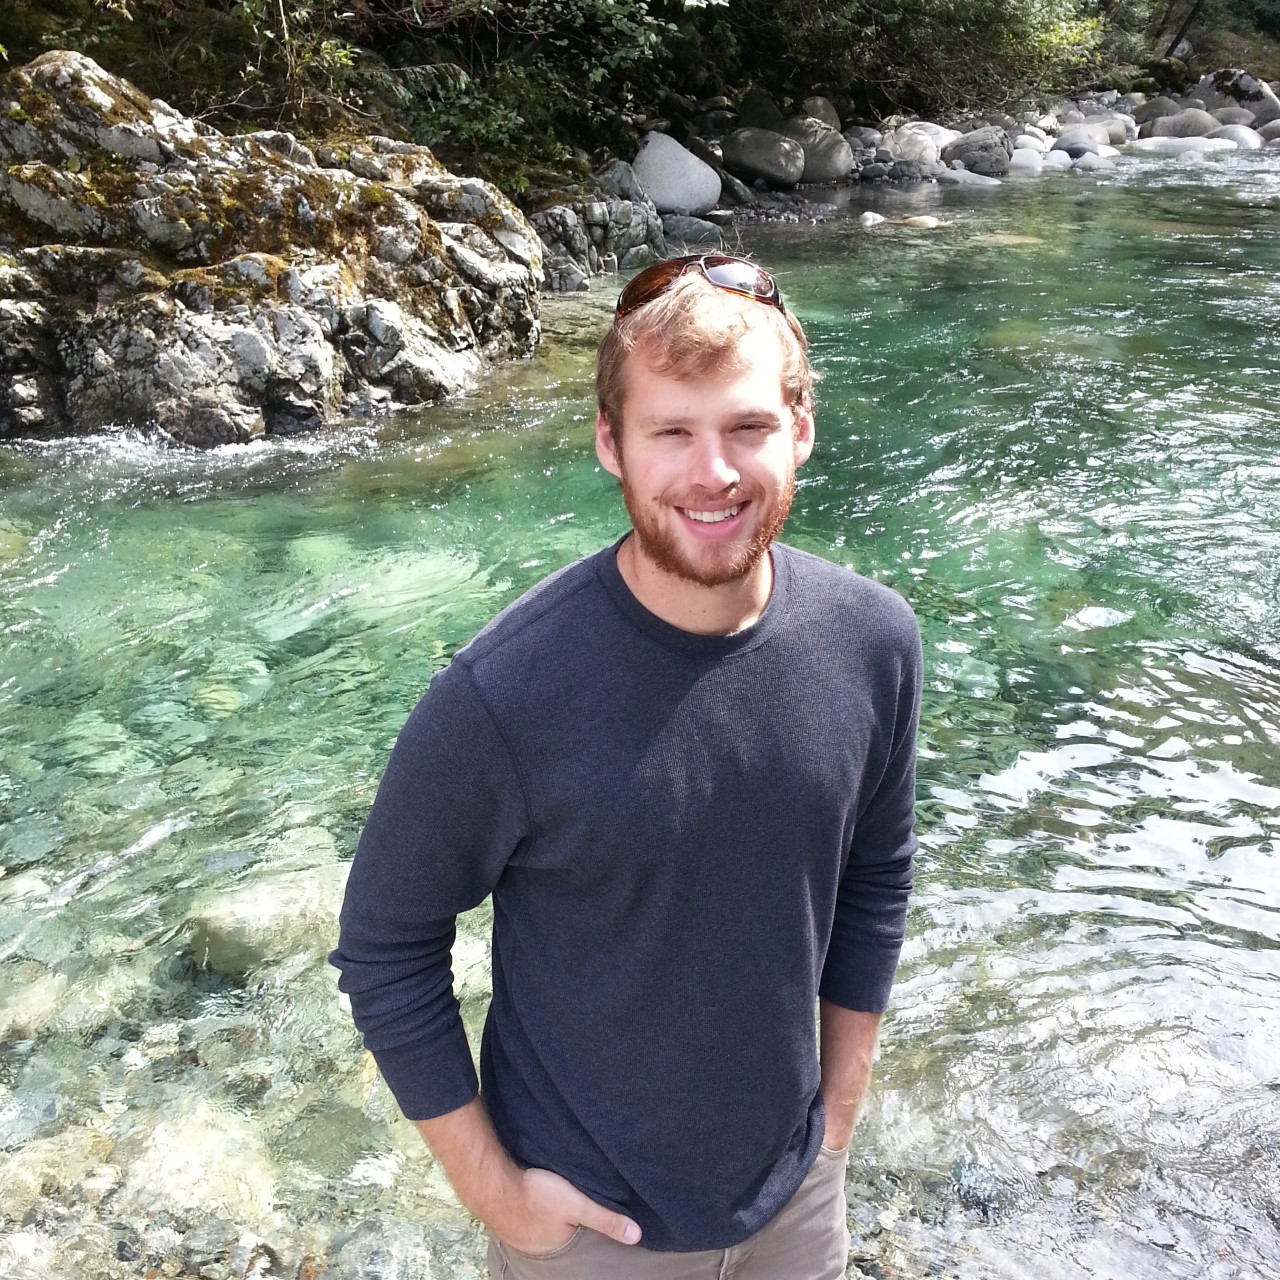 person smiling against a background of a clear water and rocky shores.